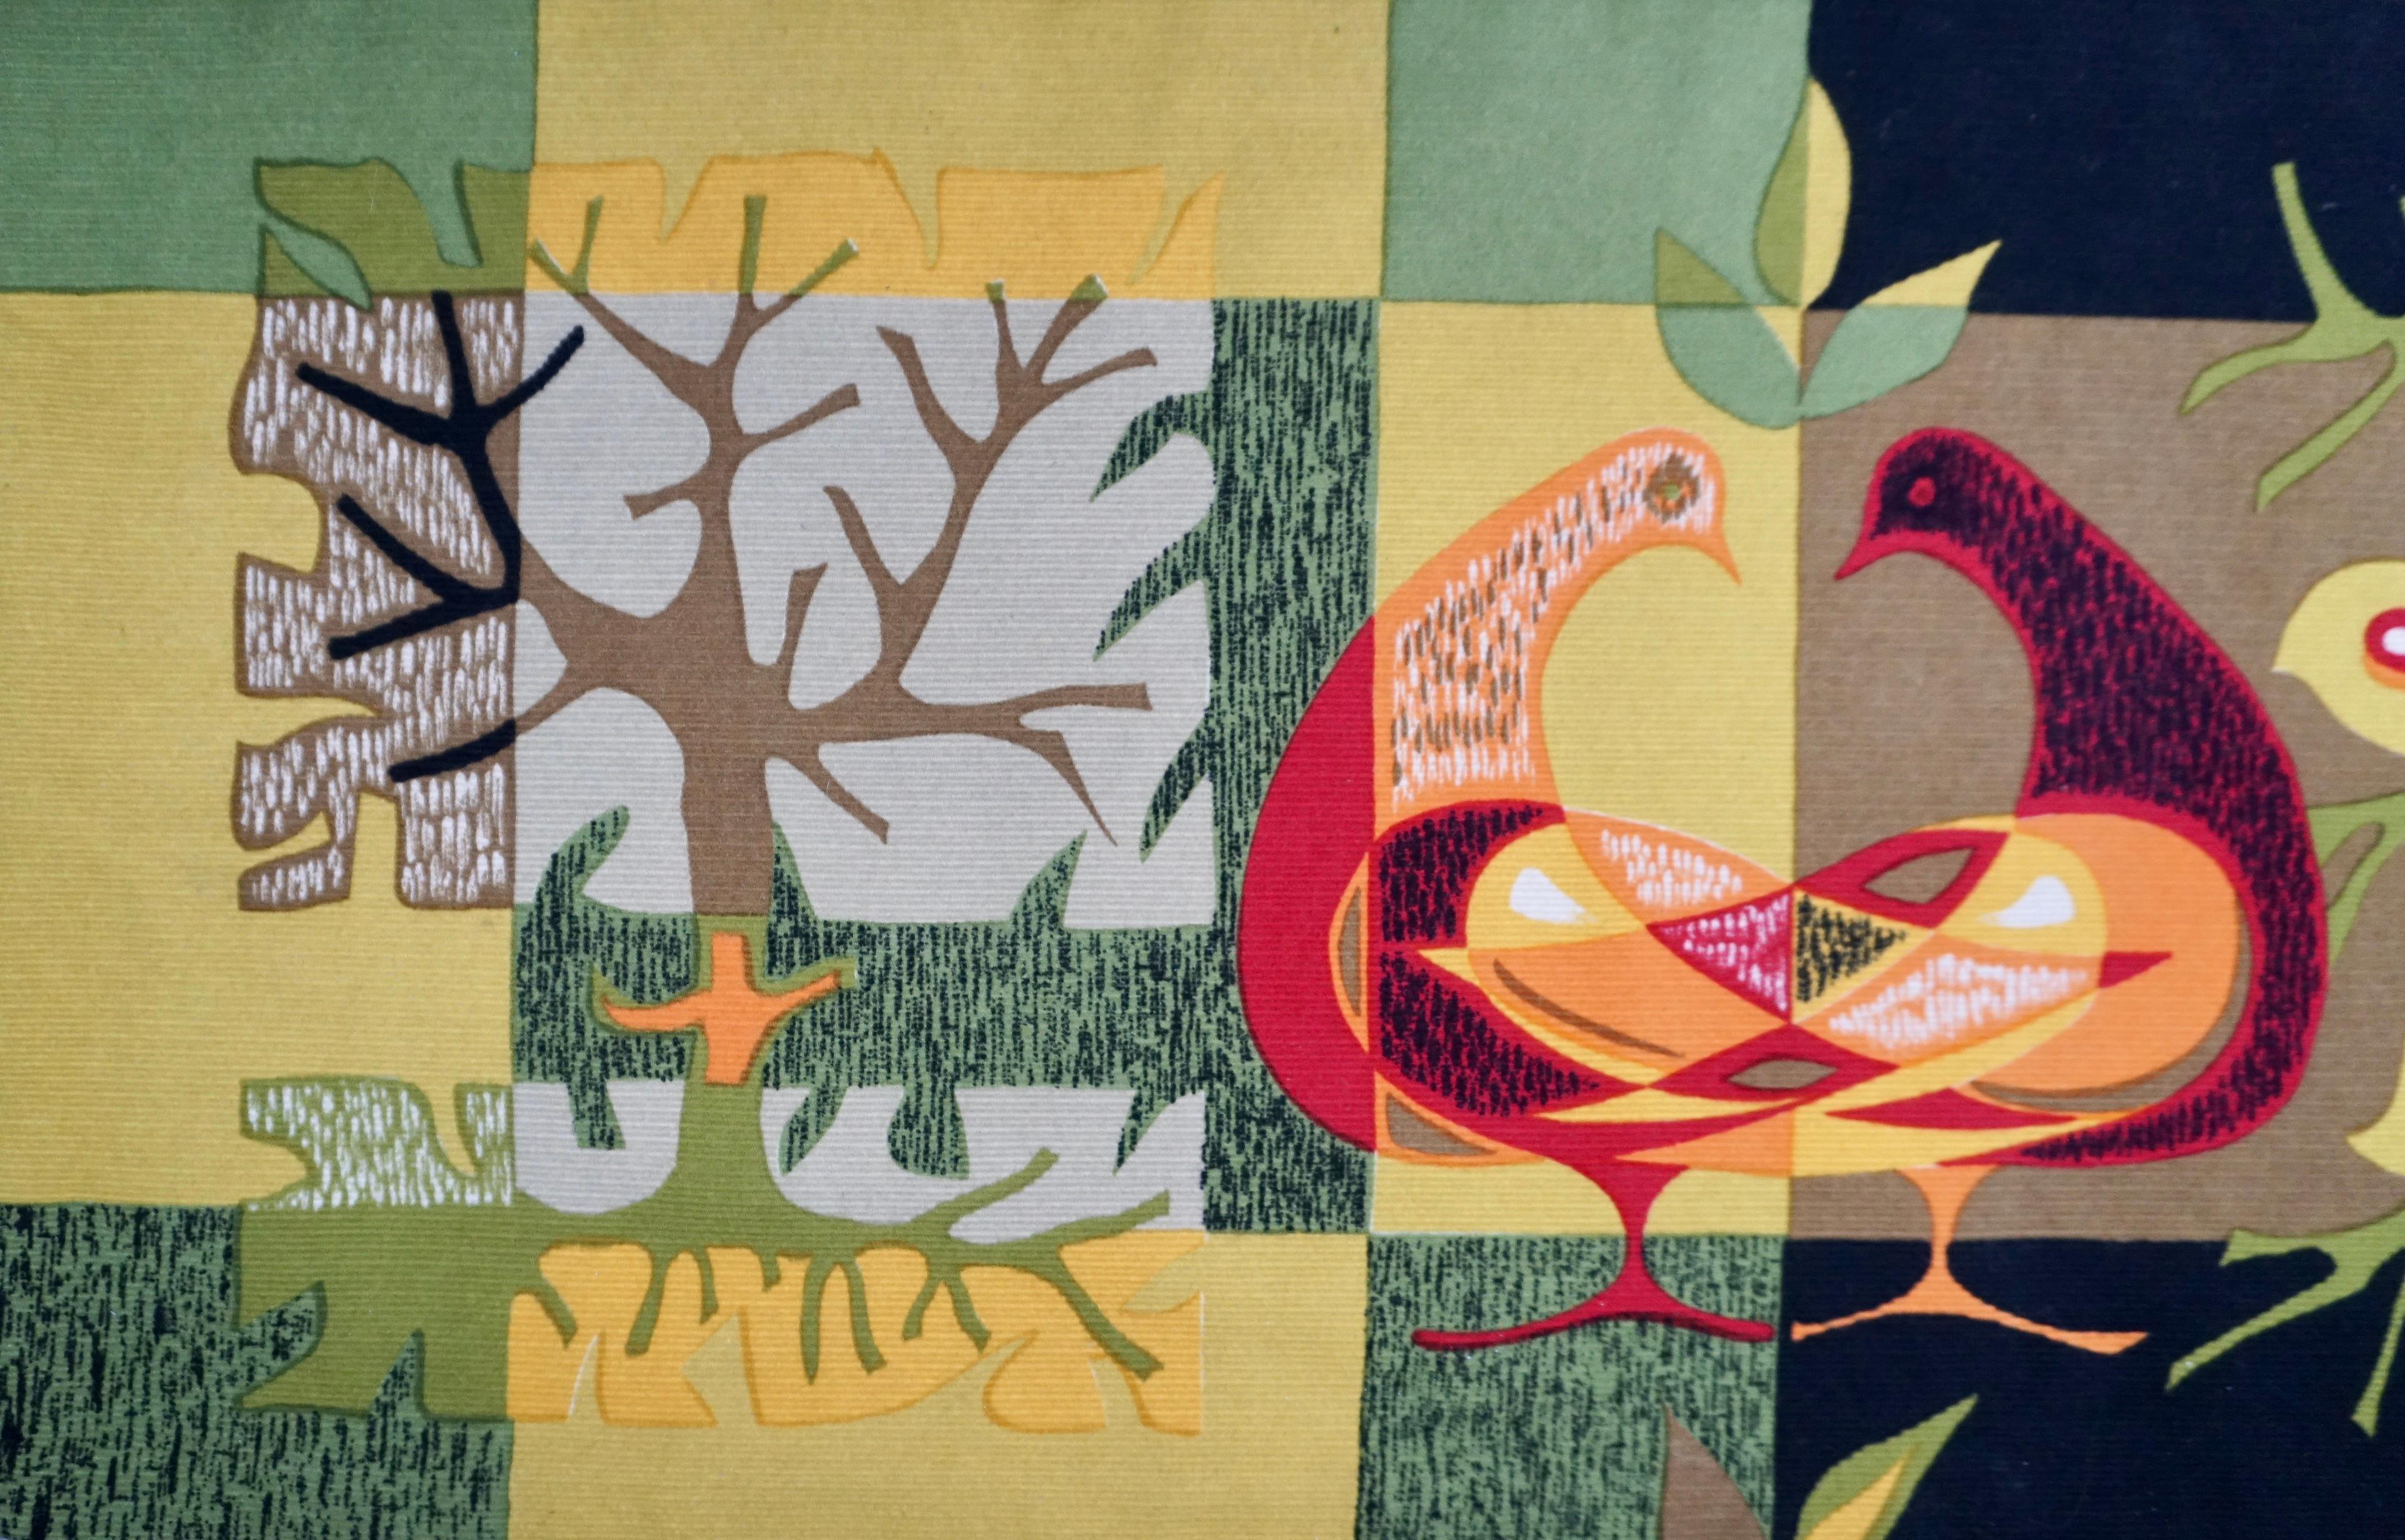 Horizontal vintage wool tapestry signed by Michèle Van hout le Beau, circa 1970, entitled “Les oiseaux d’or”. 
Depicting an abstract figurative colorful nature scene with two birds. 

Michèle Van Hout le Beau designed numerous cartoons in the 1960’s